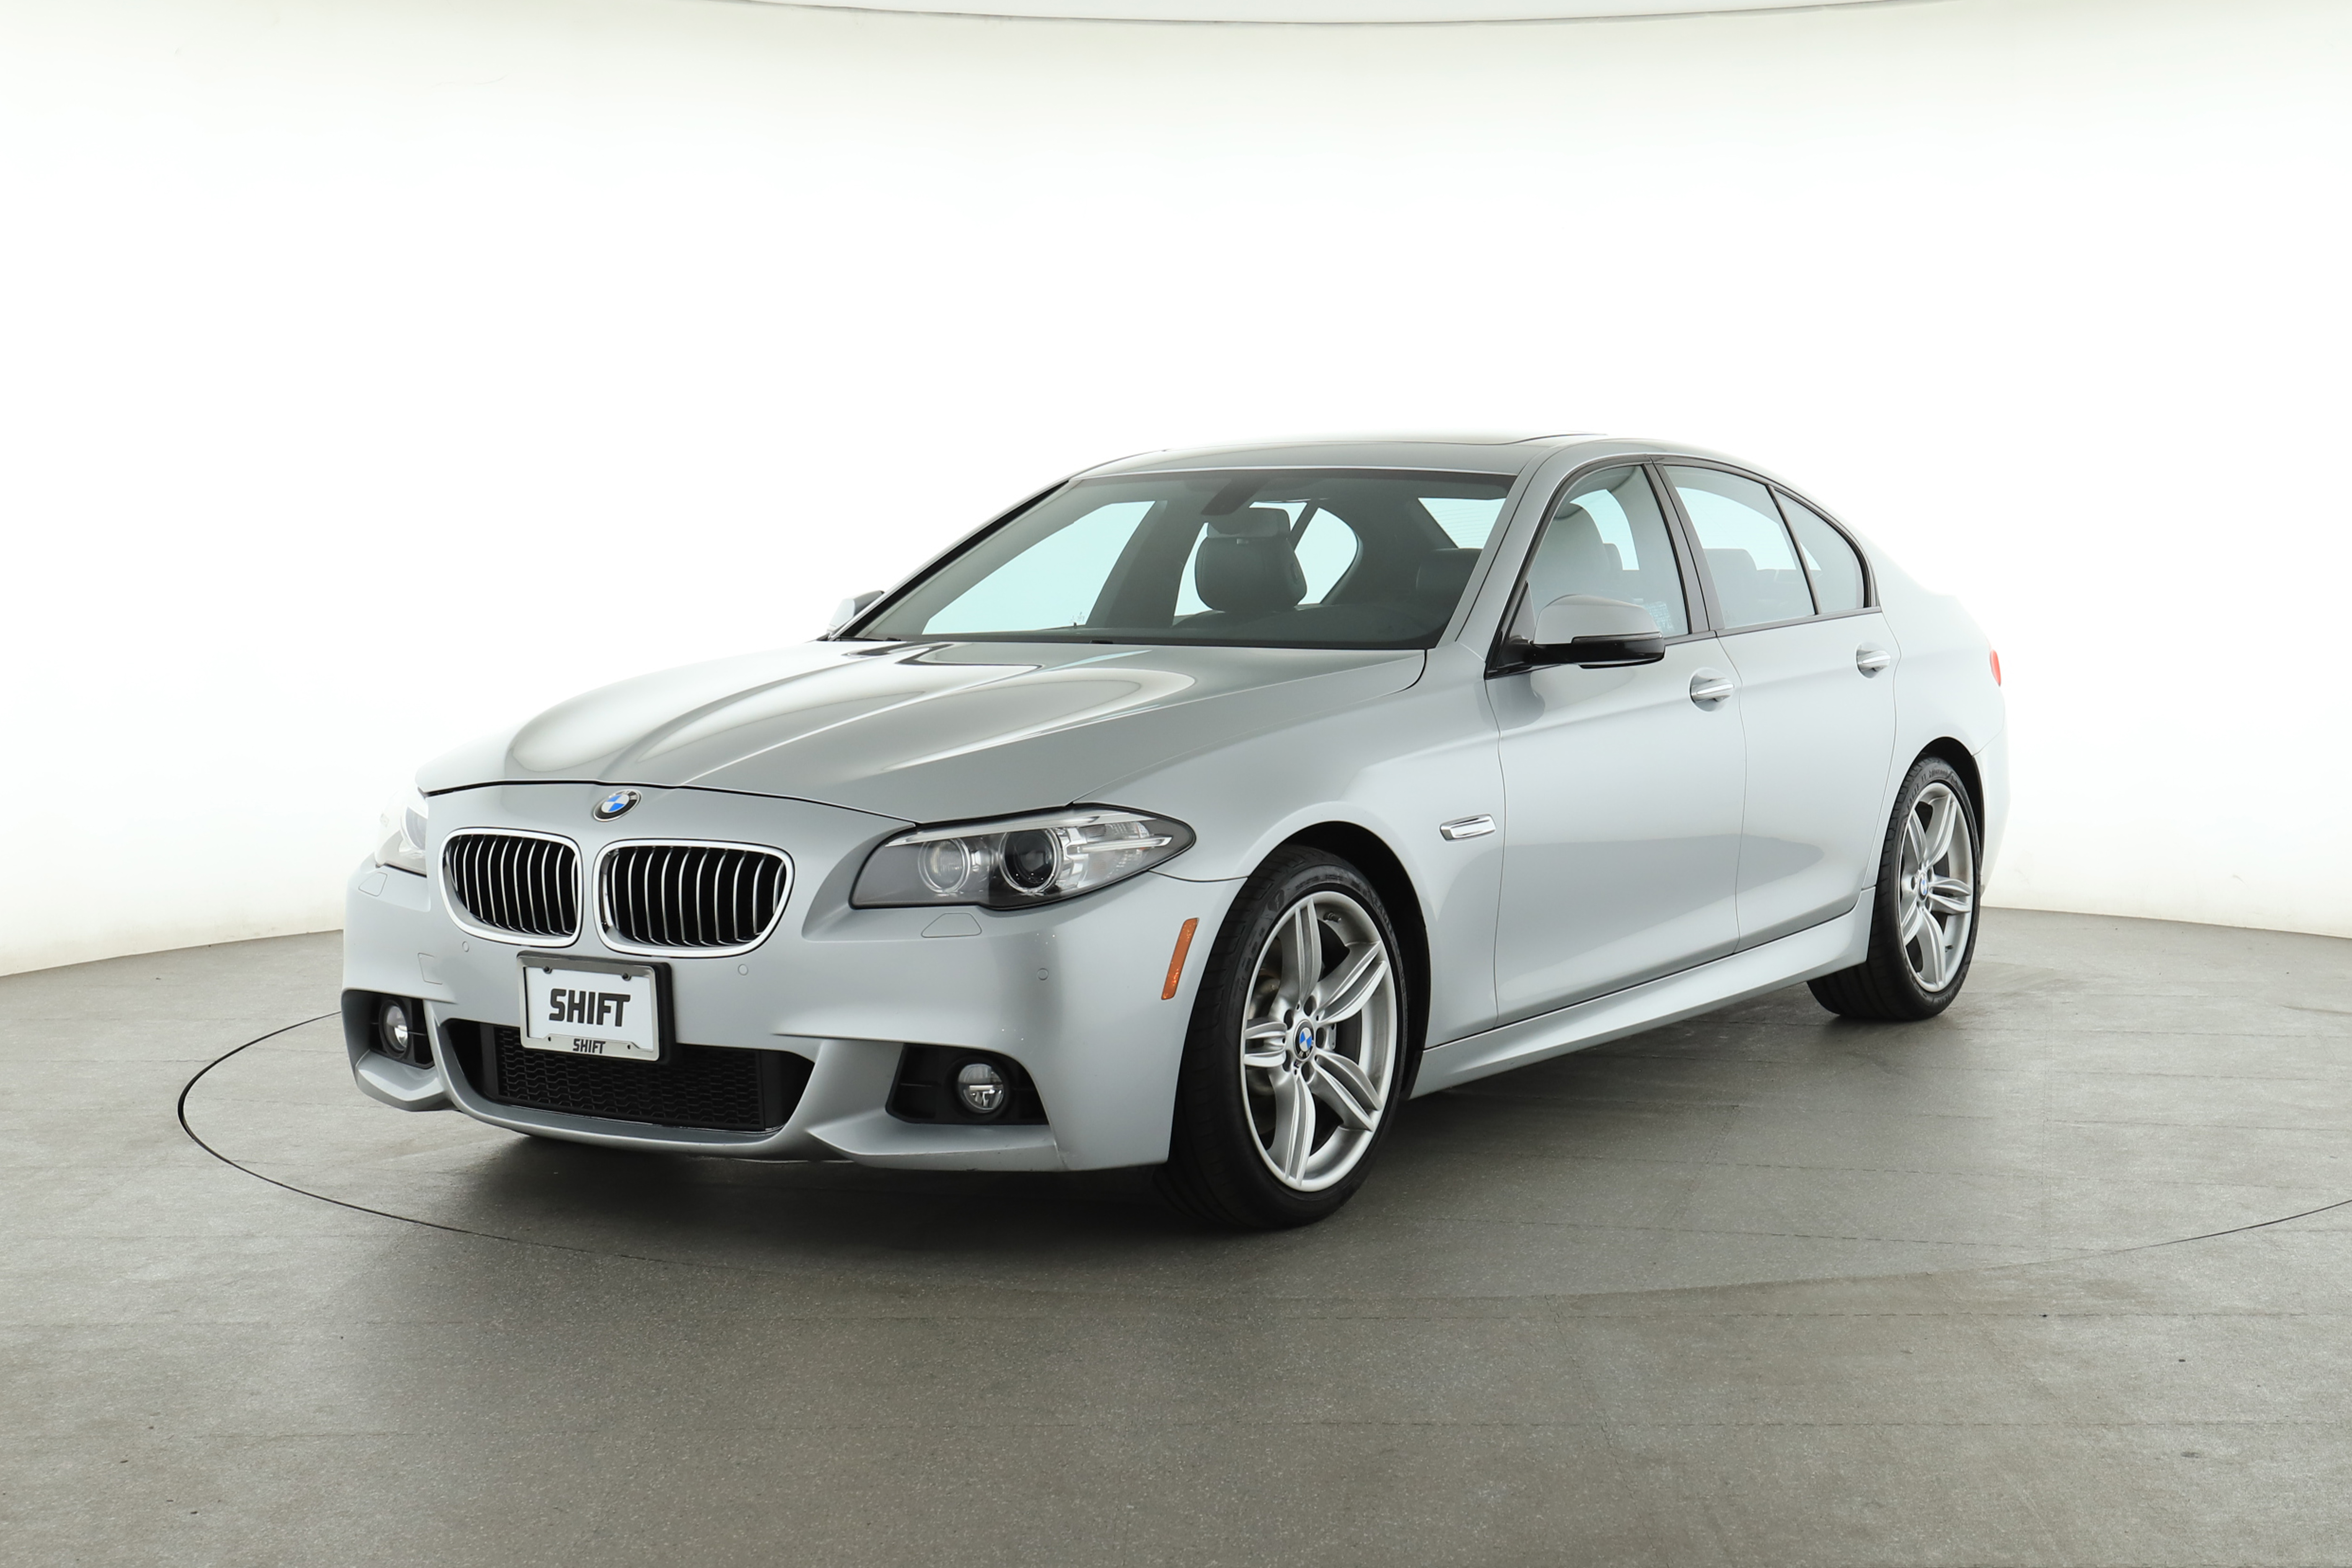 Used 2016 Silver BMW 5 Series for $24,950